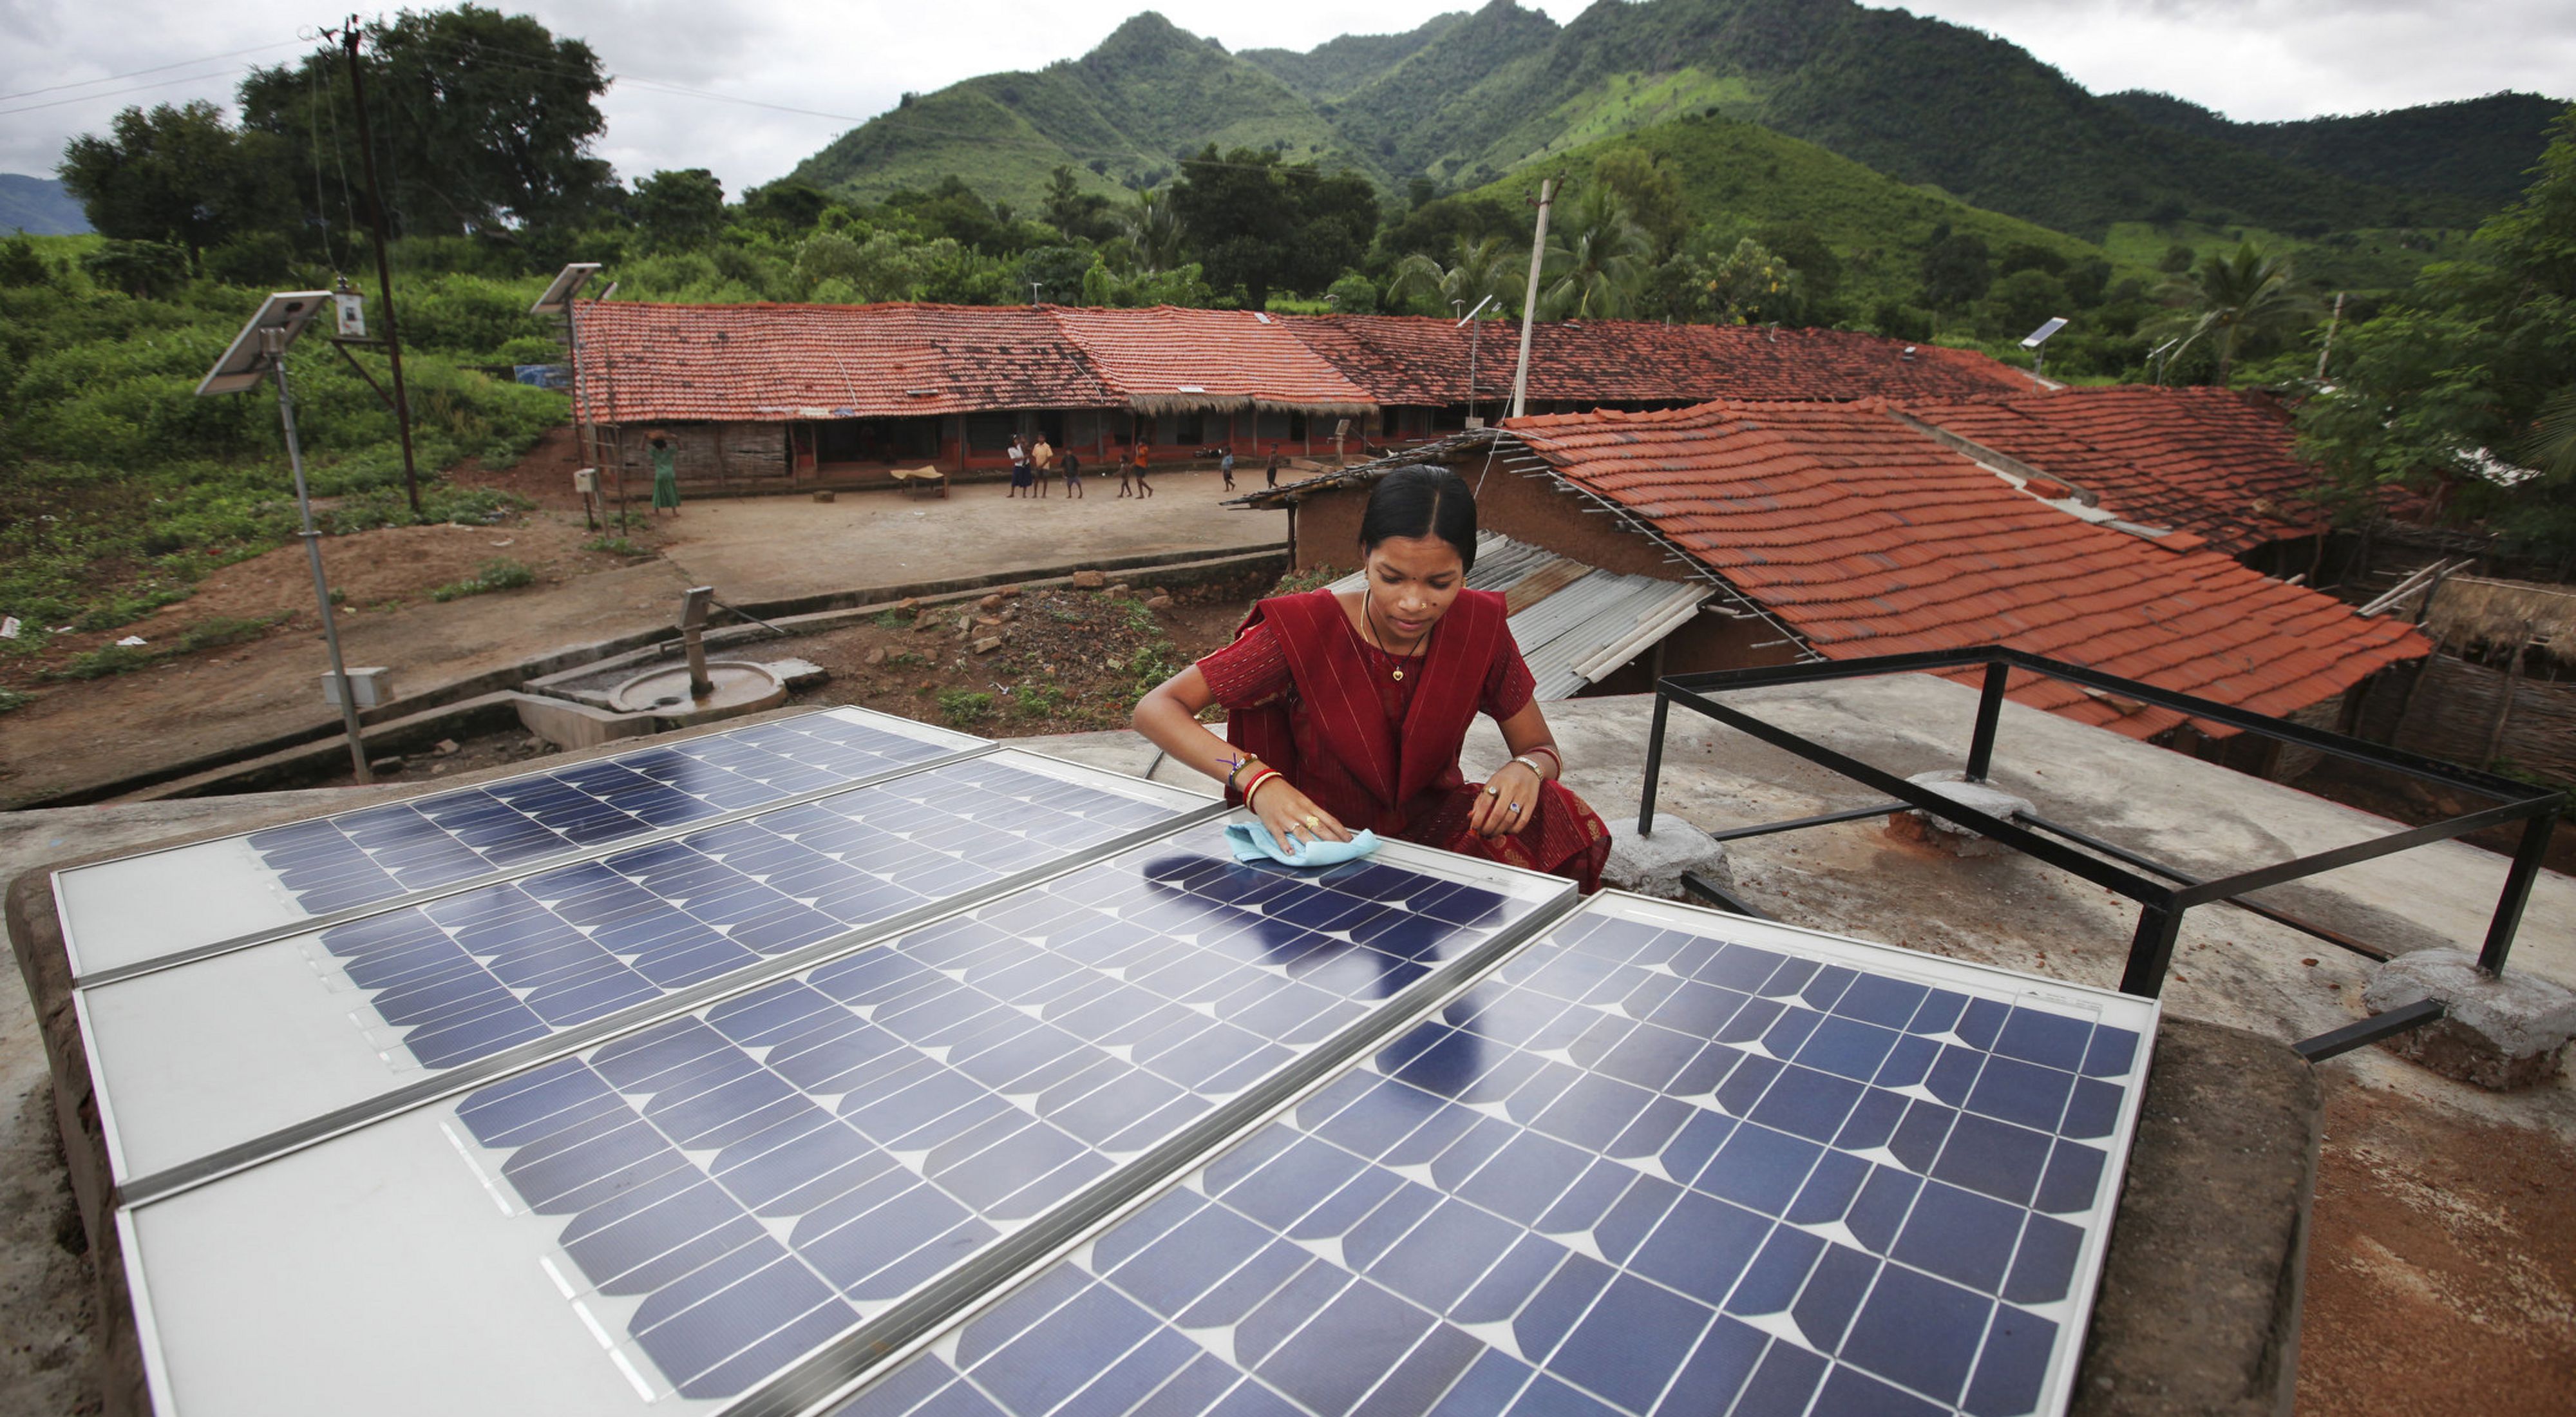 A person uses a cloth to clean solar panels on the roof of a village home in India.